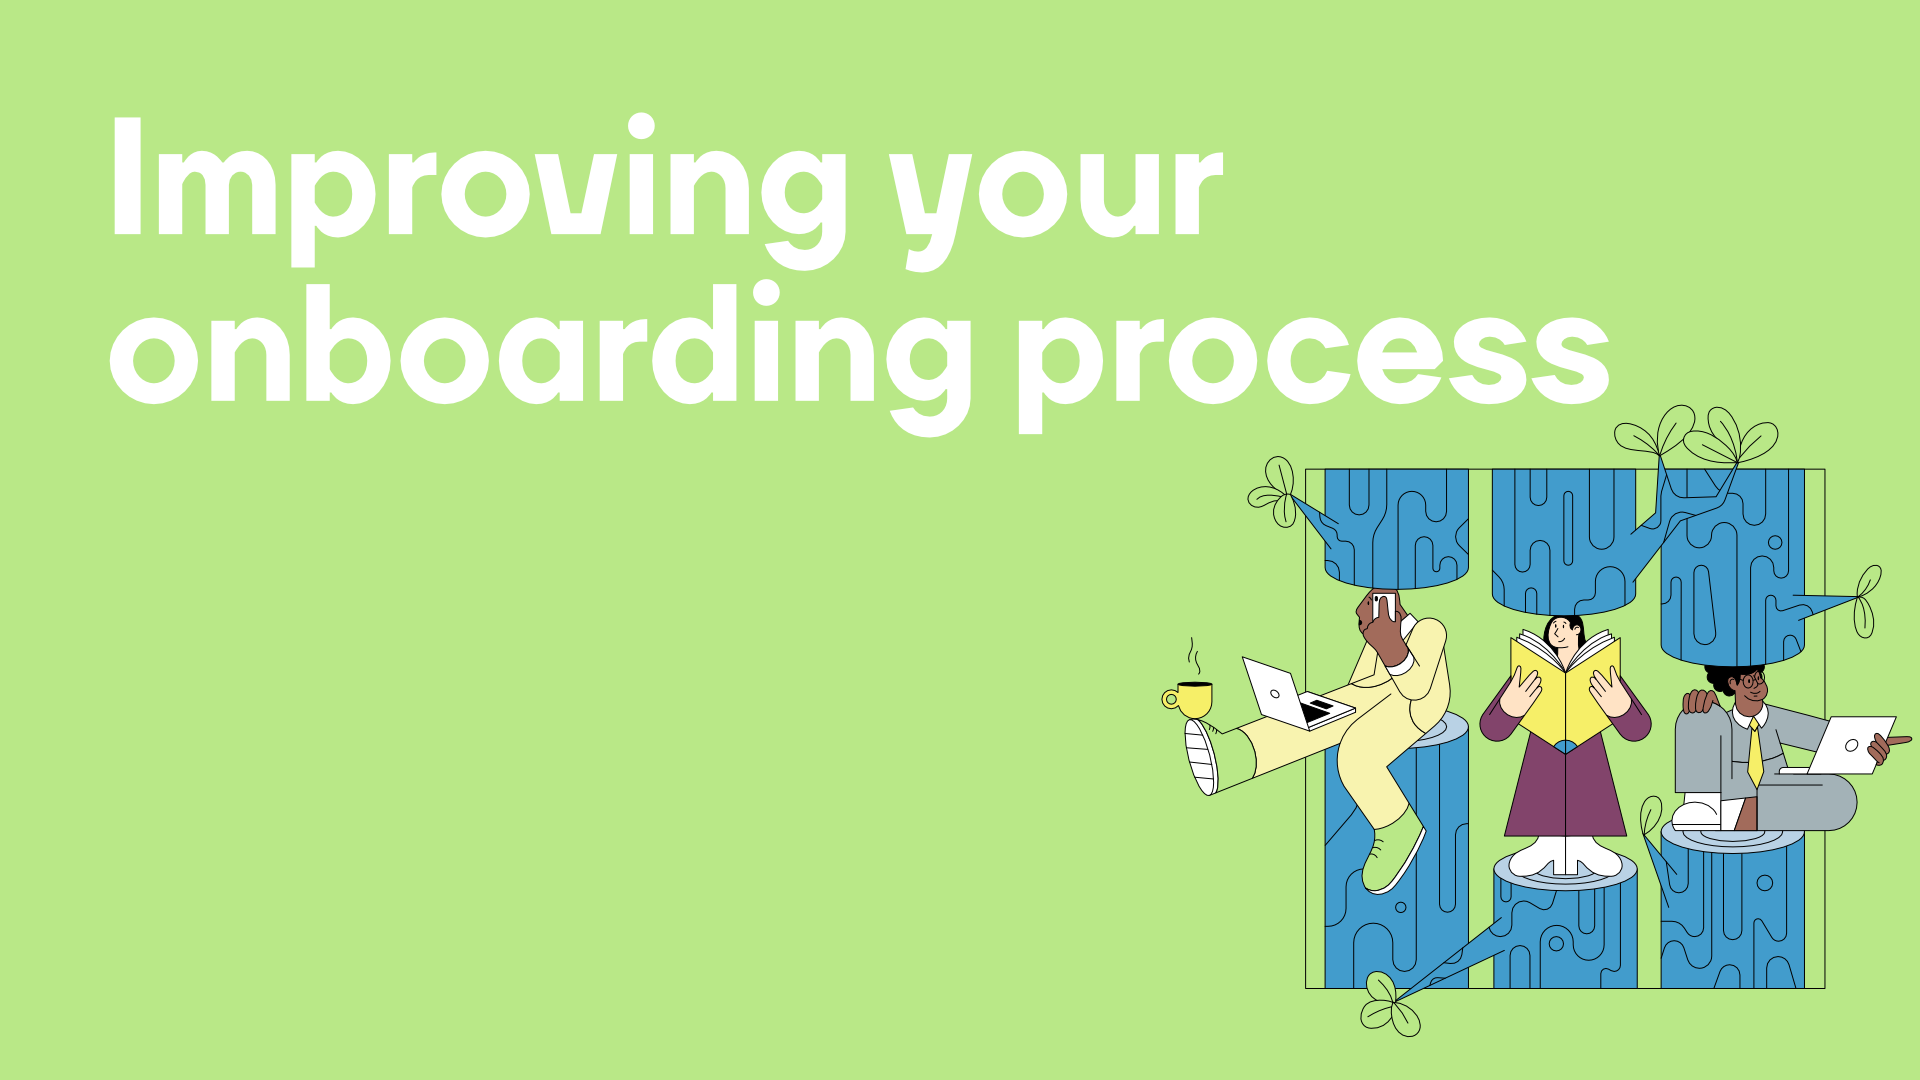 Improving your onboarding process